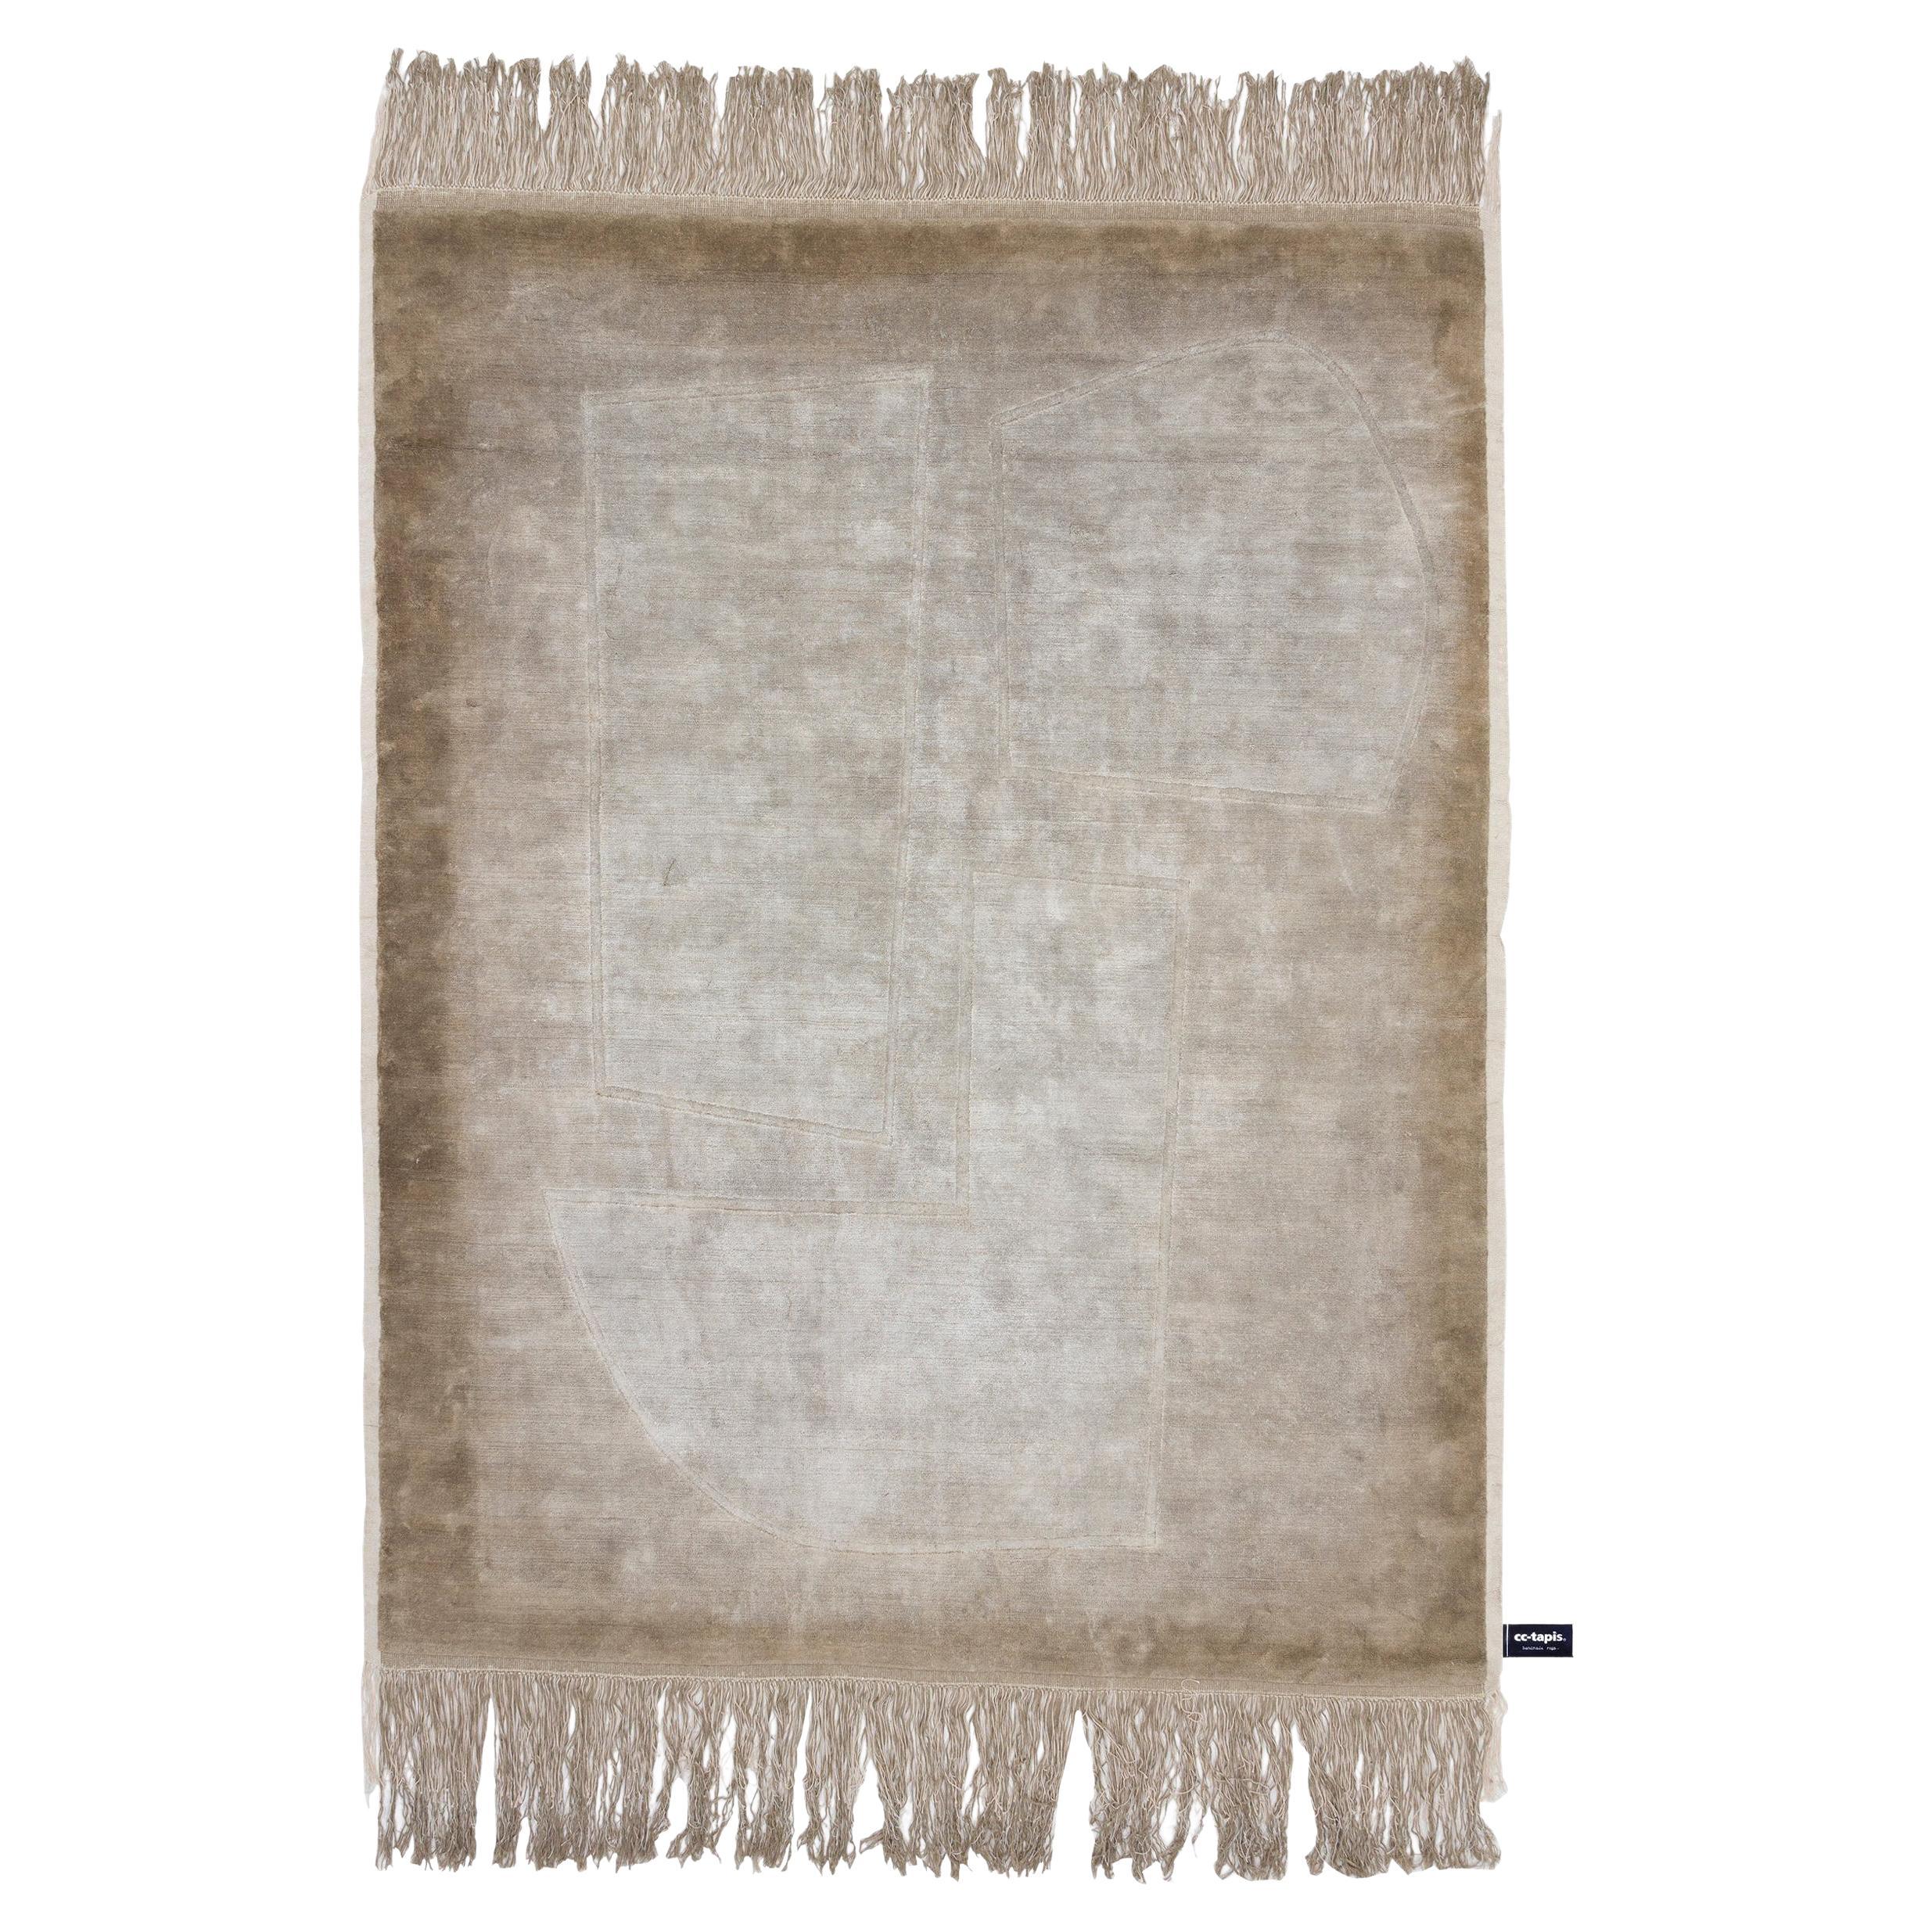 cc-tapis Inventory Patch Rug Raw by Faye Toogood - IN STOCK